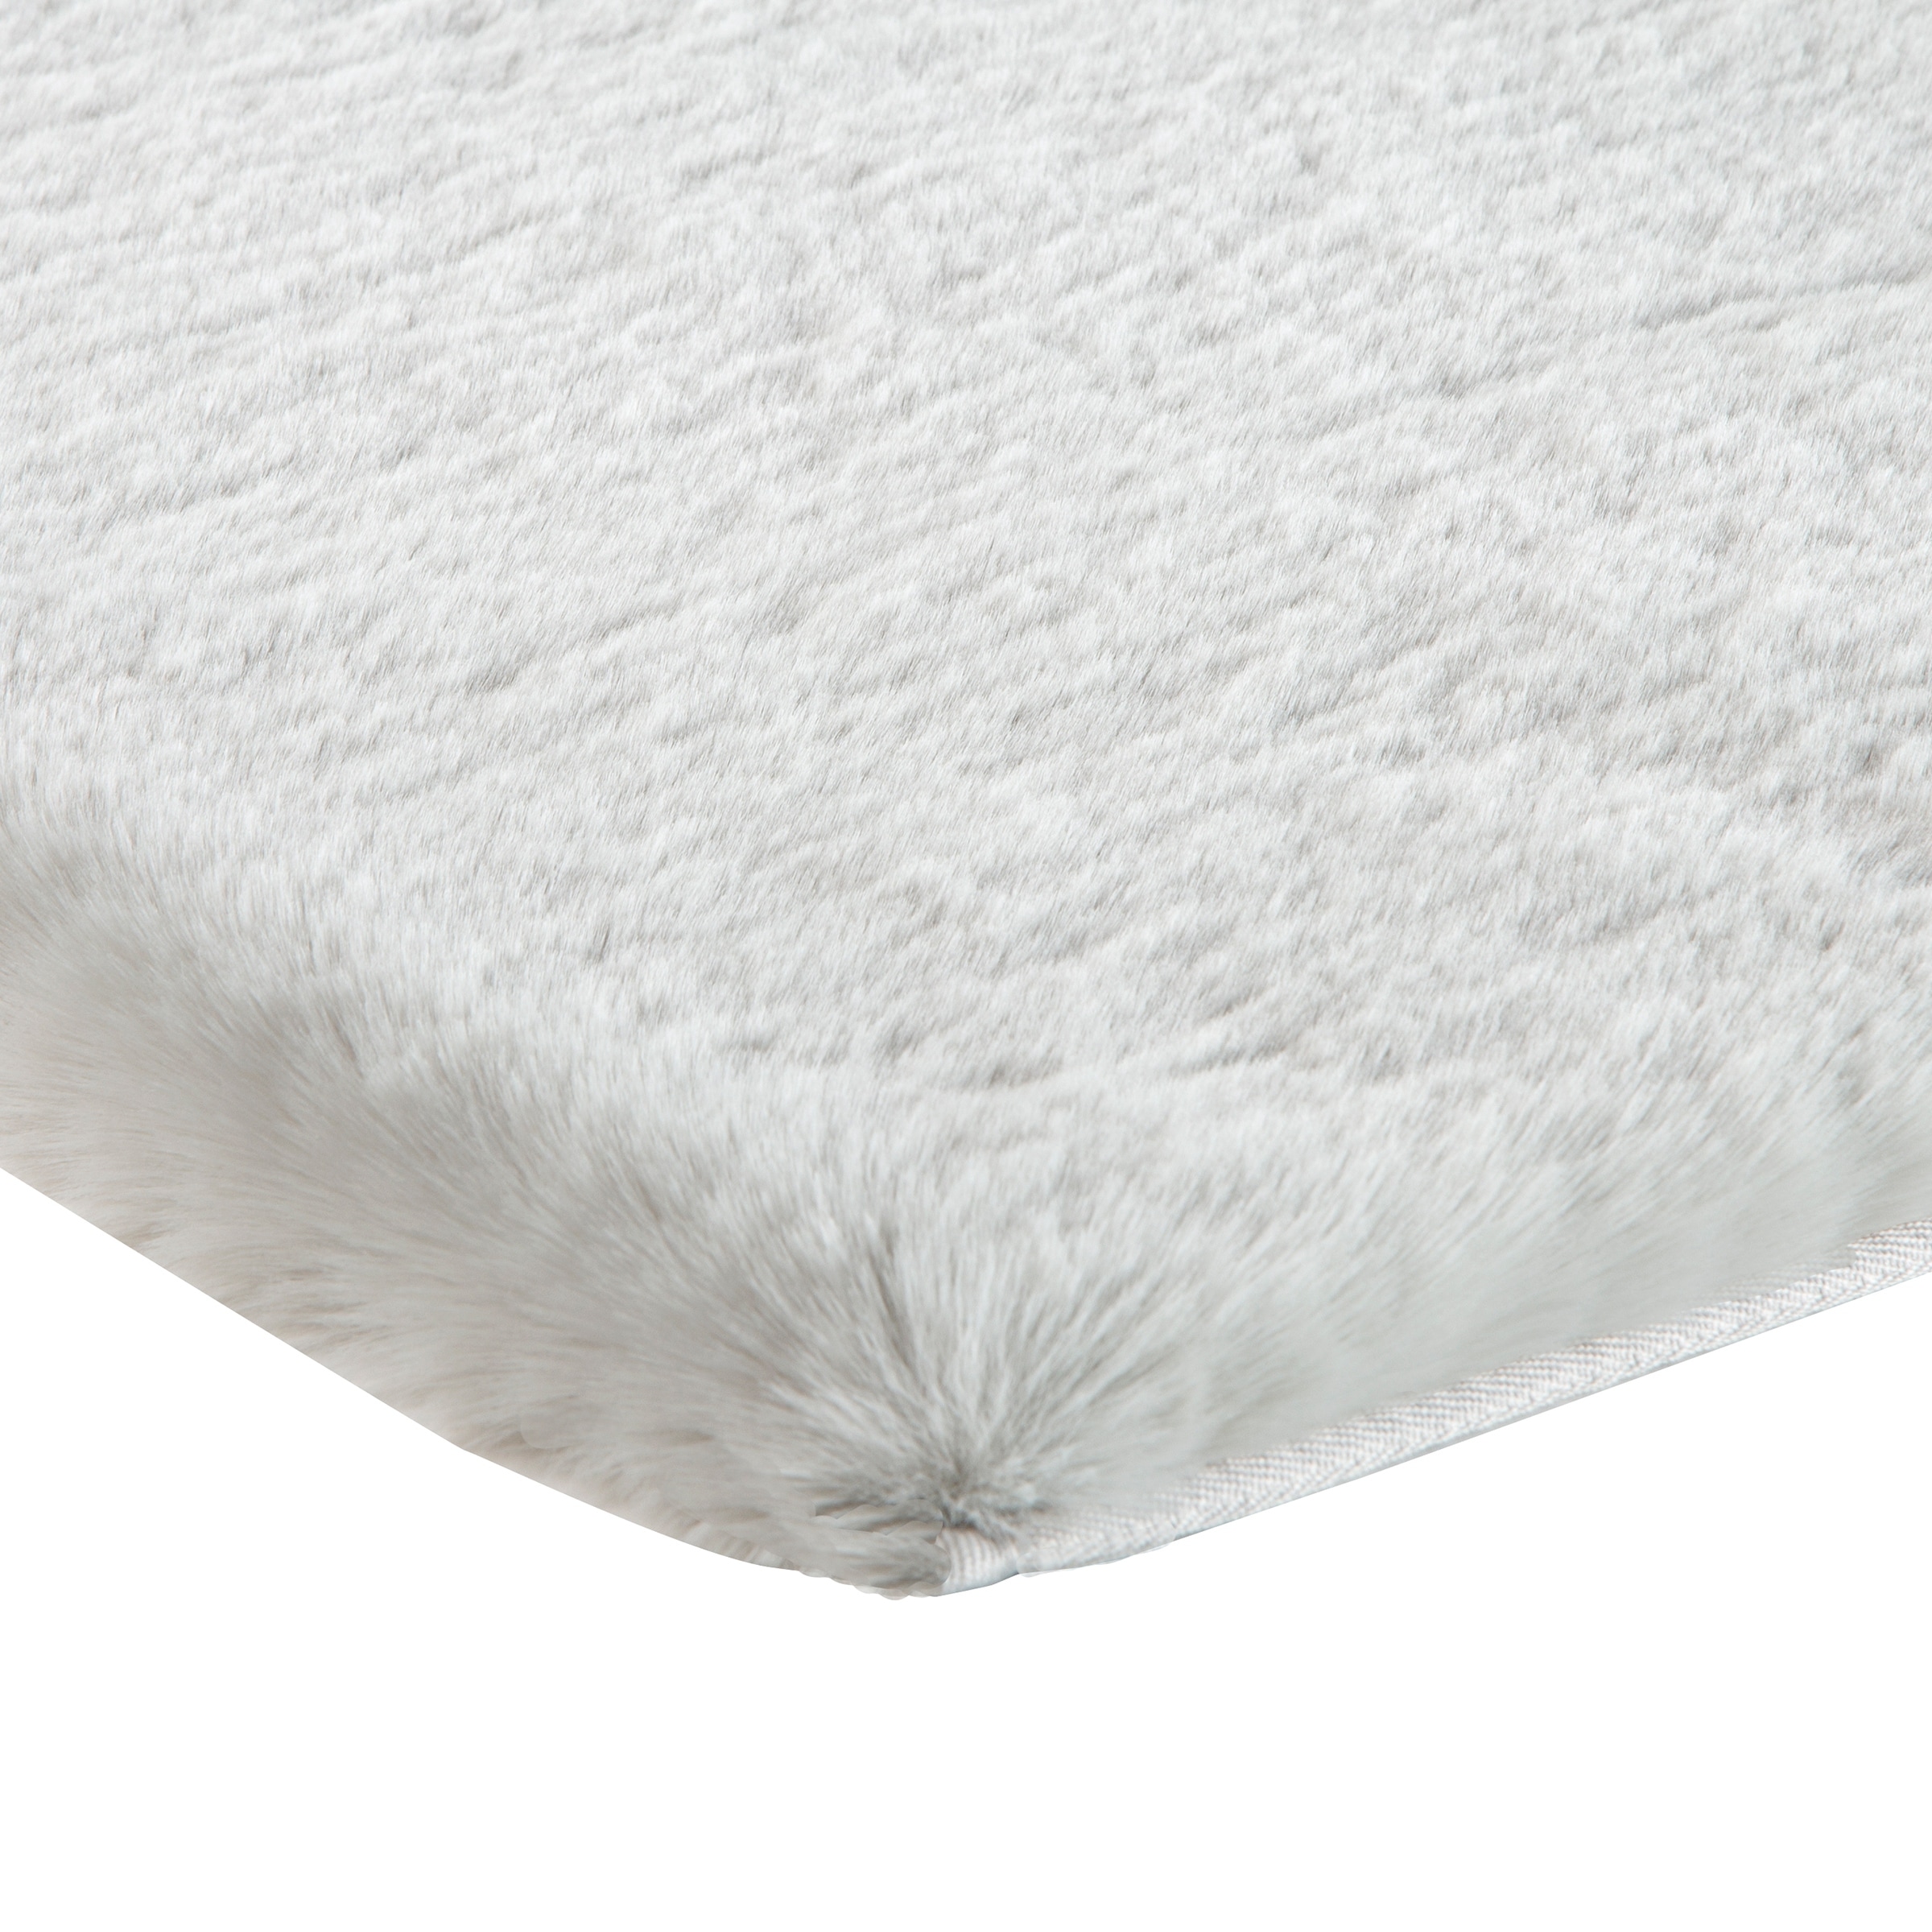 https://ak1.ostkcdn.com/images/products/is/images/direct/13e025a91226025c053e8fefc0f3f0bd2ebac0b9/Faux-Fur-Bath-Mat---21x60-Inch-Nonslip-Rug-by-Home-Complete.jpg